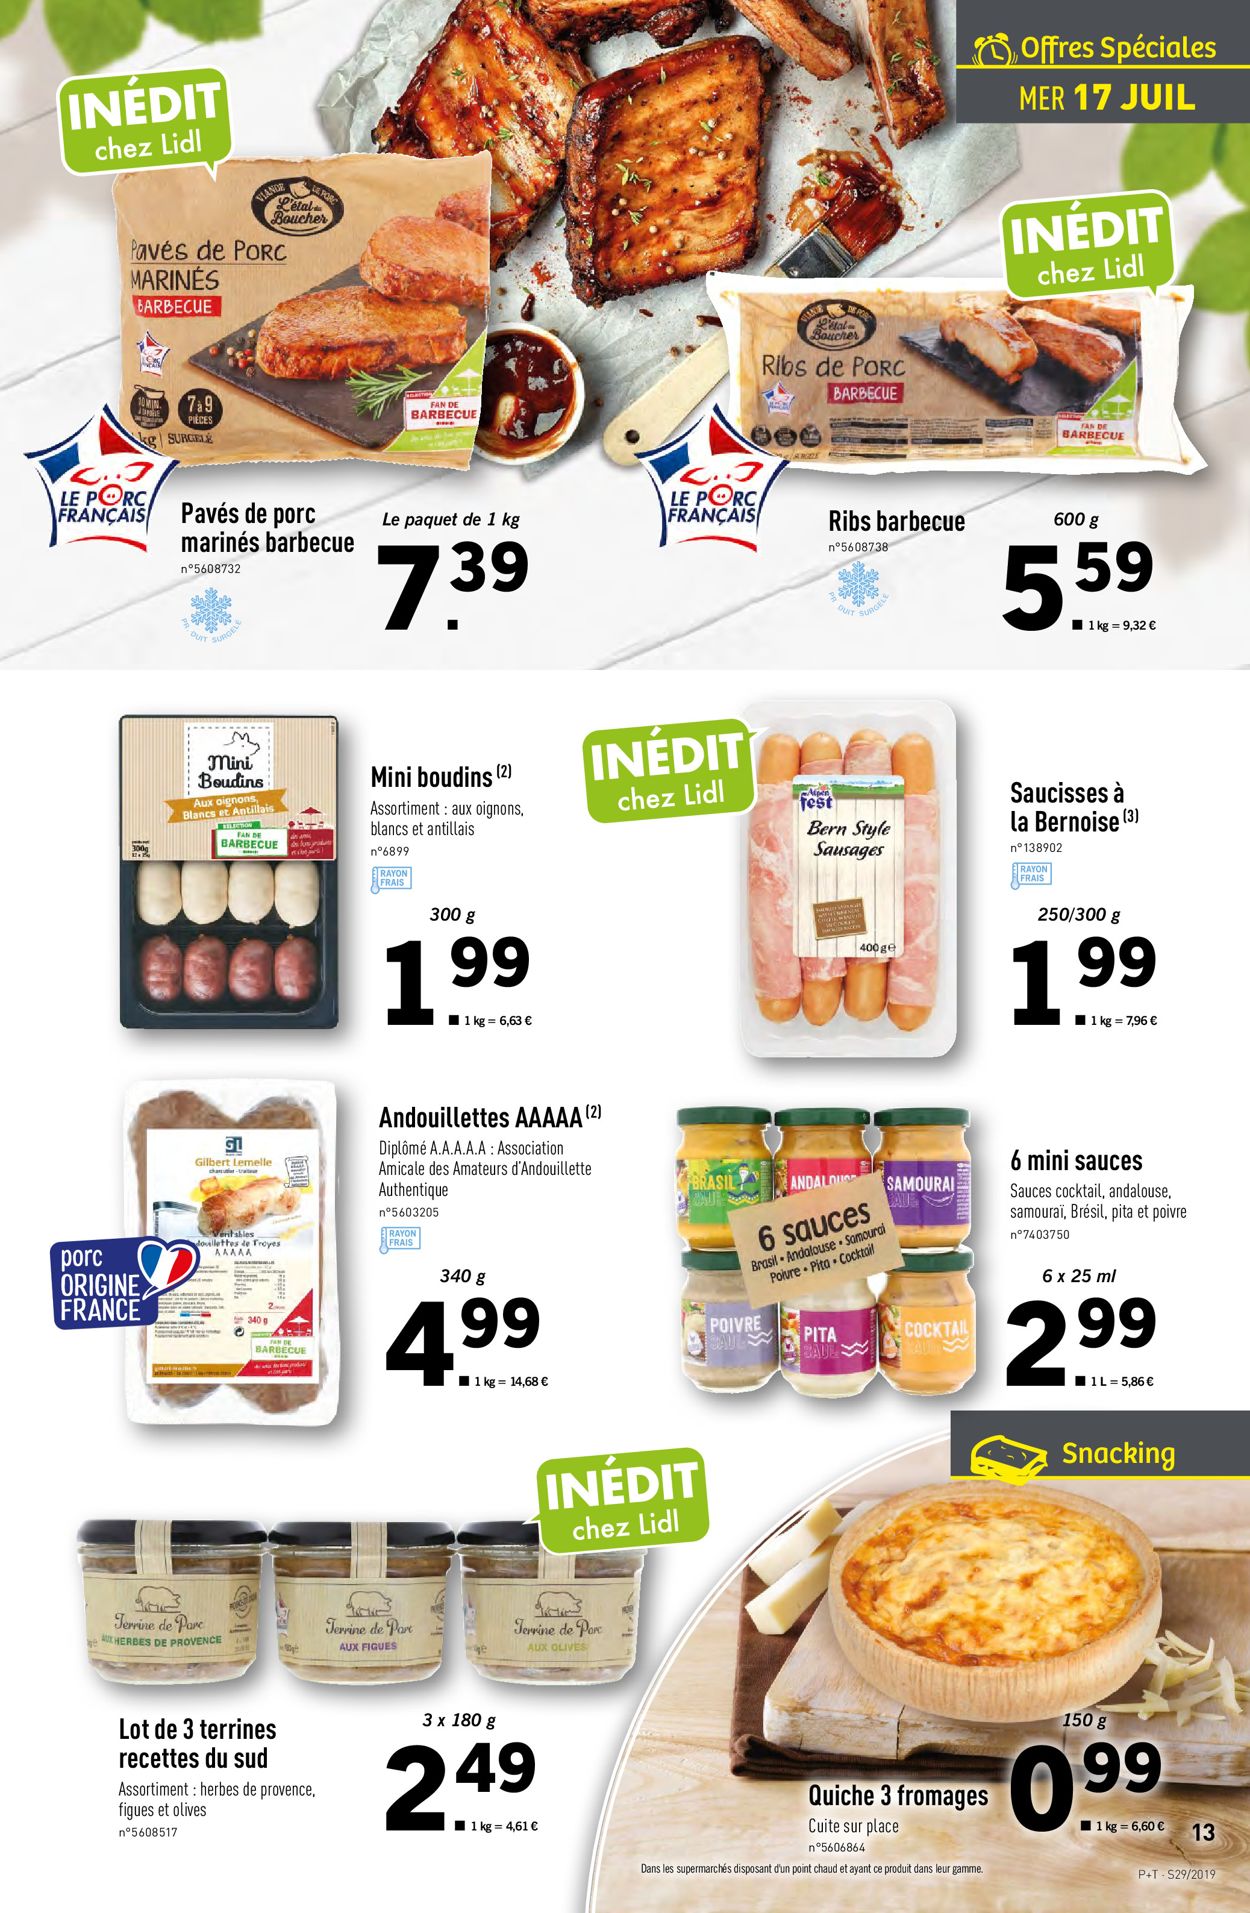 Lidl Catalogue - 17.07-23.07.2019 (Page 13)